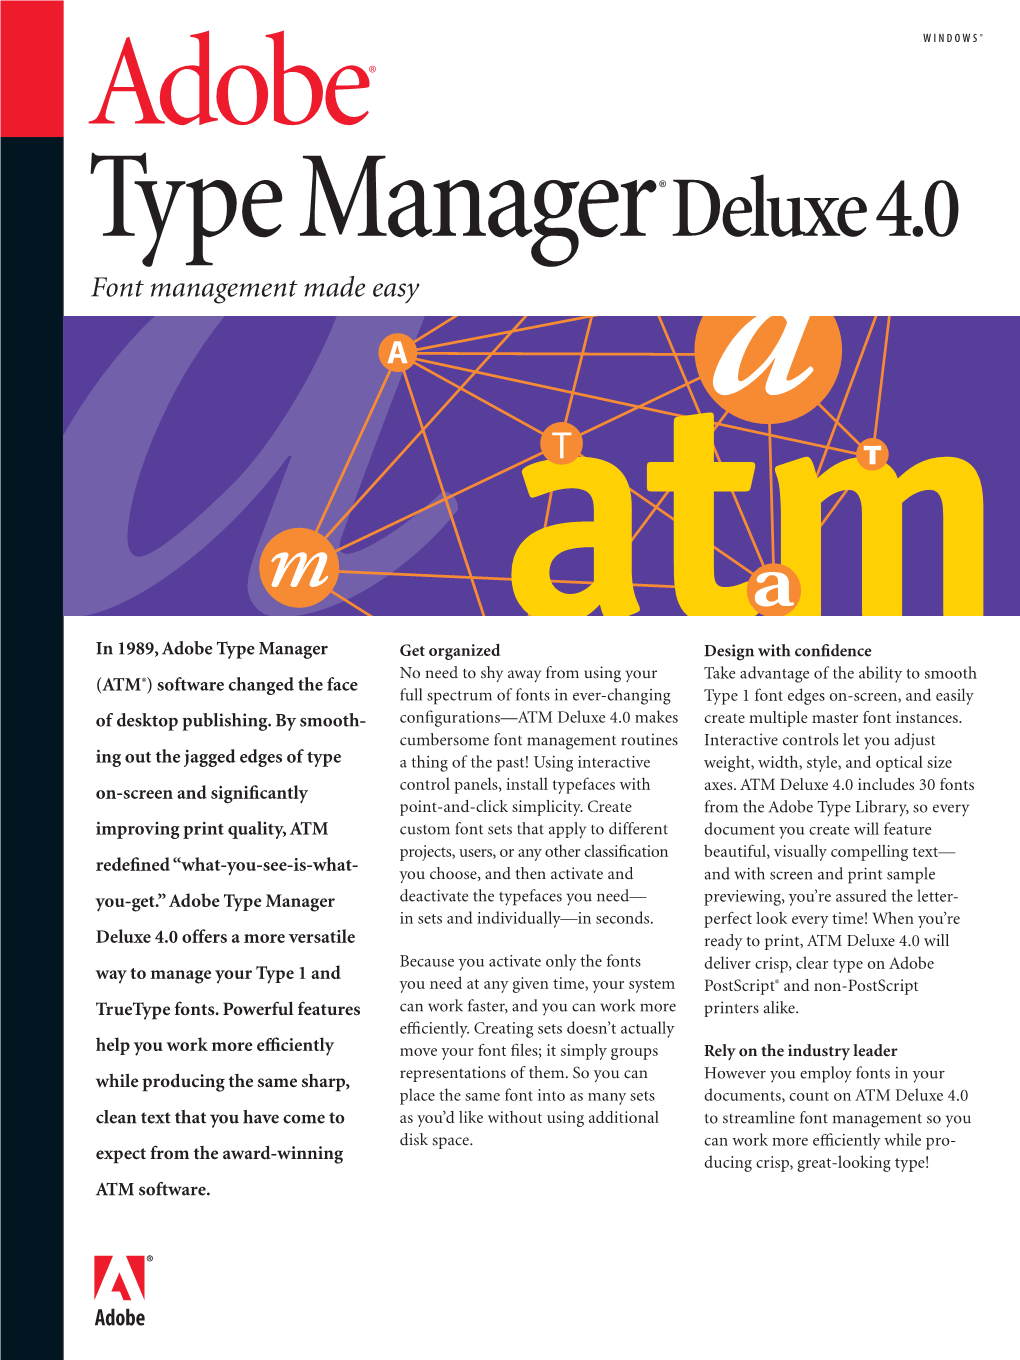 Adobe Type Manager Deluxe 4.0 You Activate and Create Multiple Master Software Deactivate Font Instances Easily